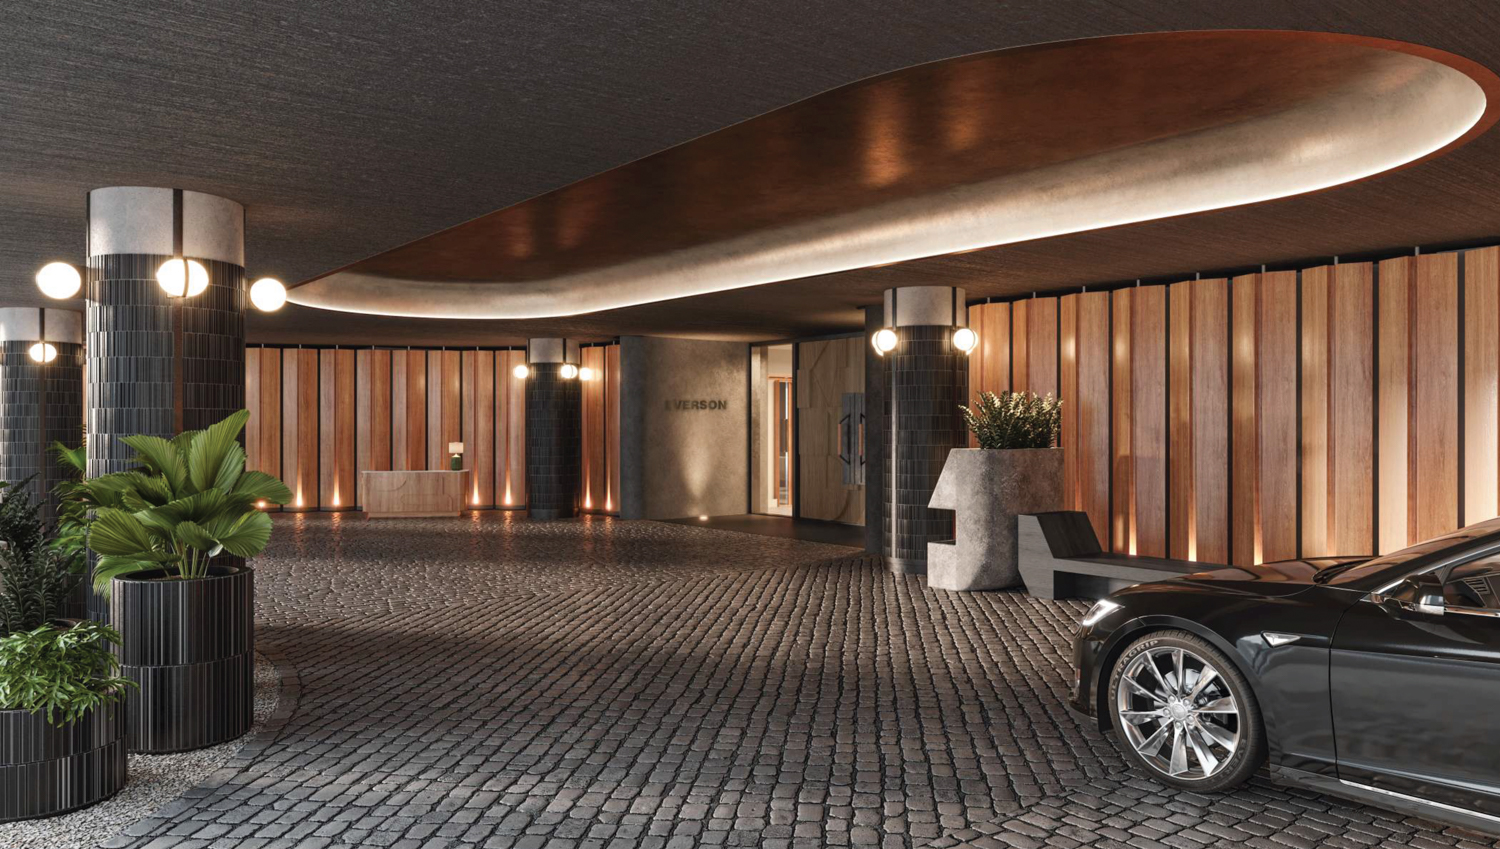 Jay Hotel vehicle porte-cochère and lobby, rendering by AvroKO